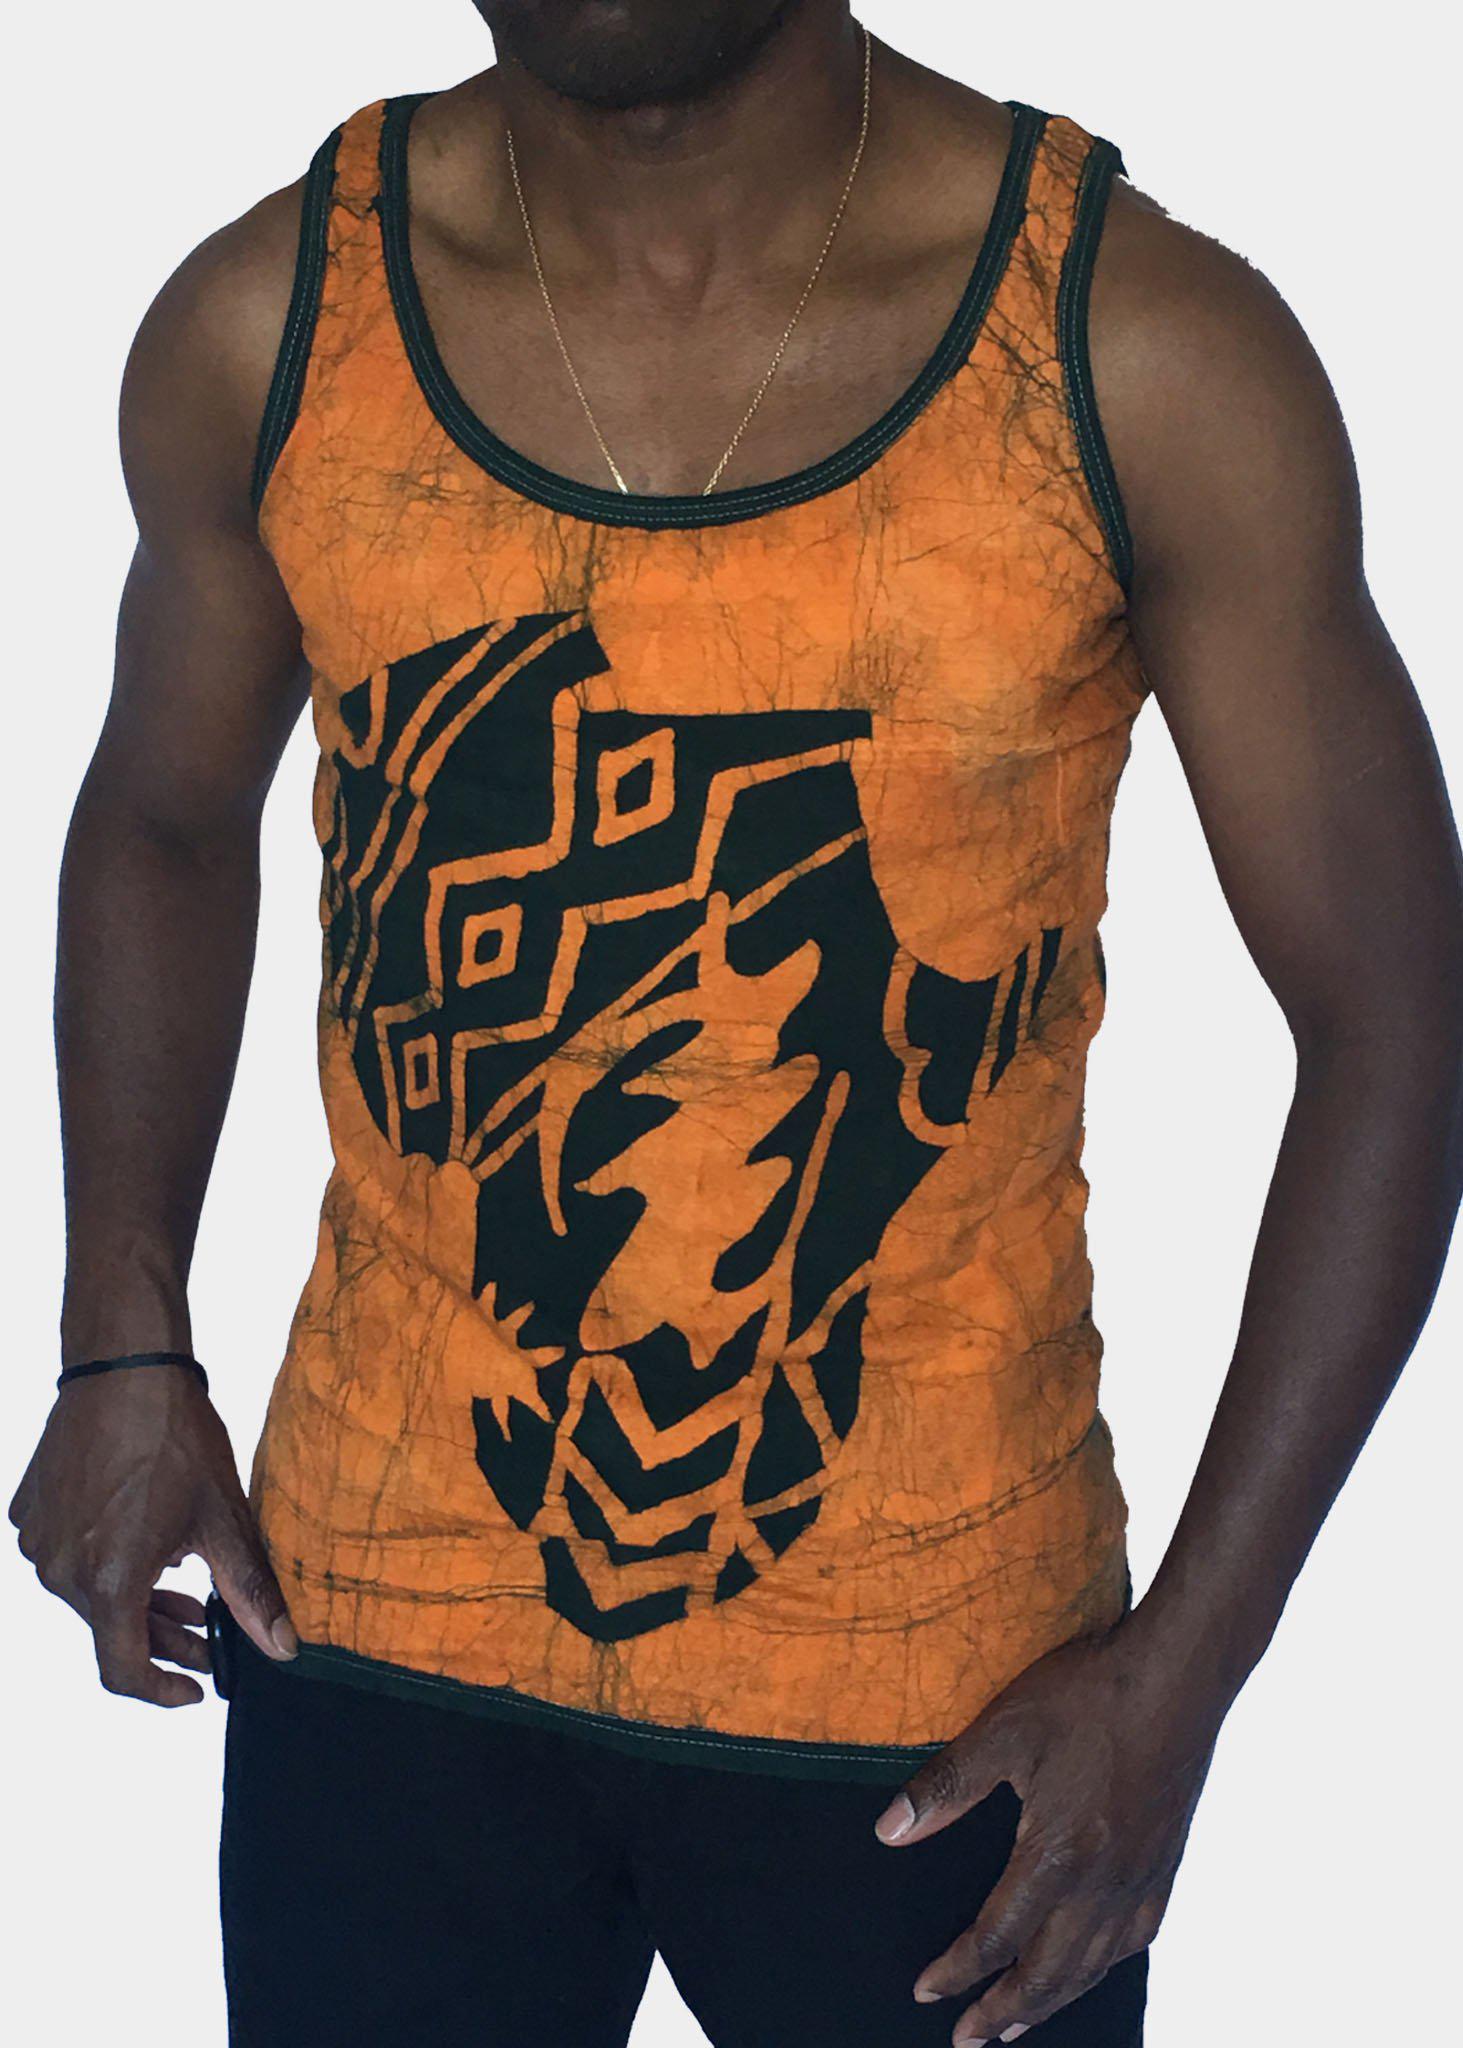 Orange and Green Fitted  Batik Tank Top with African and Adinkra Symbols -Contemporary and Colorful Ensemble-African apparel and accessories